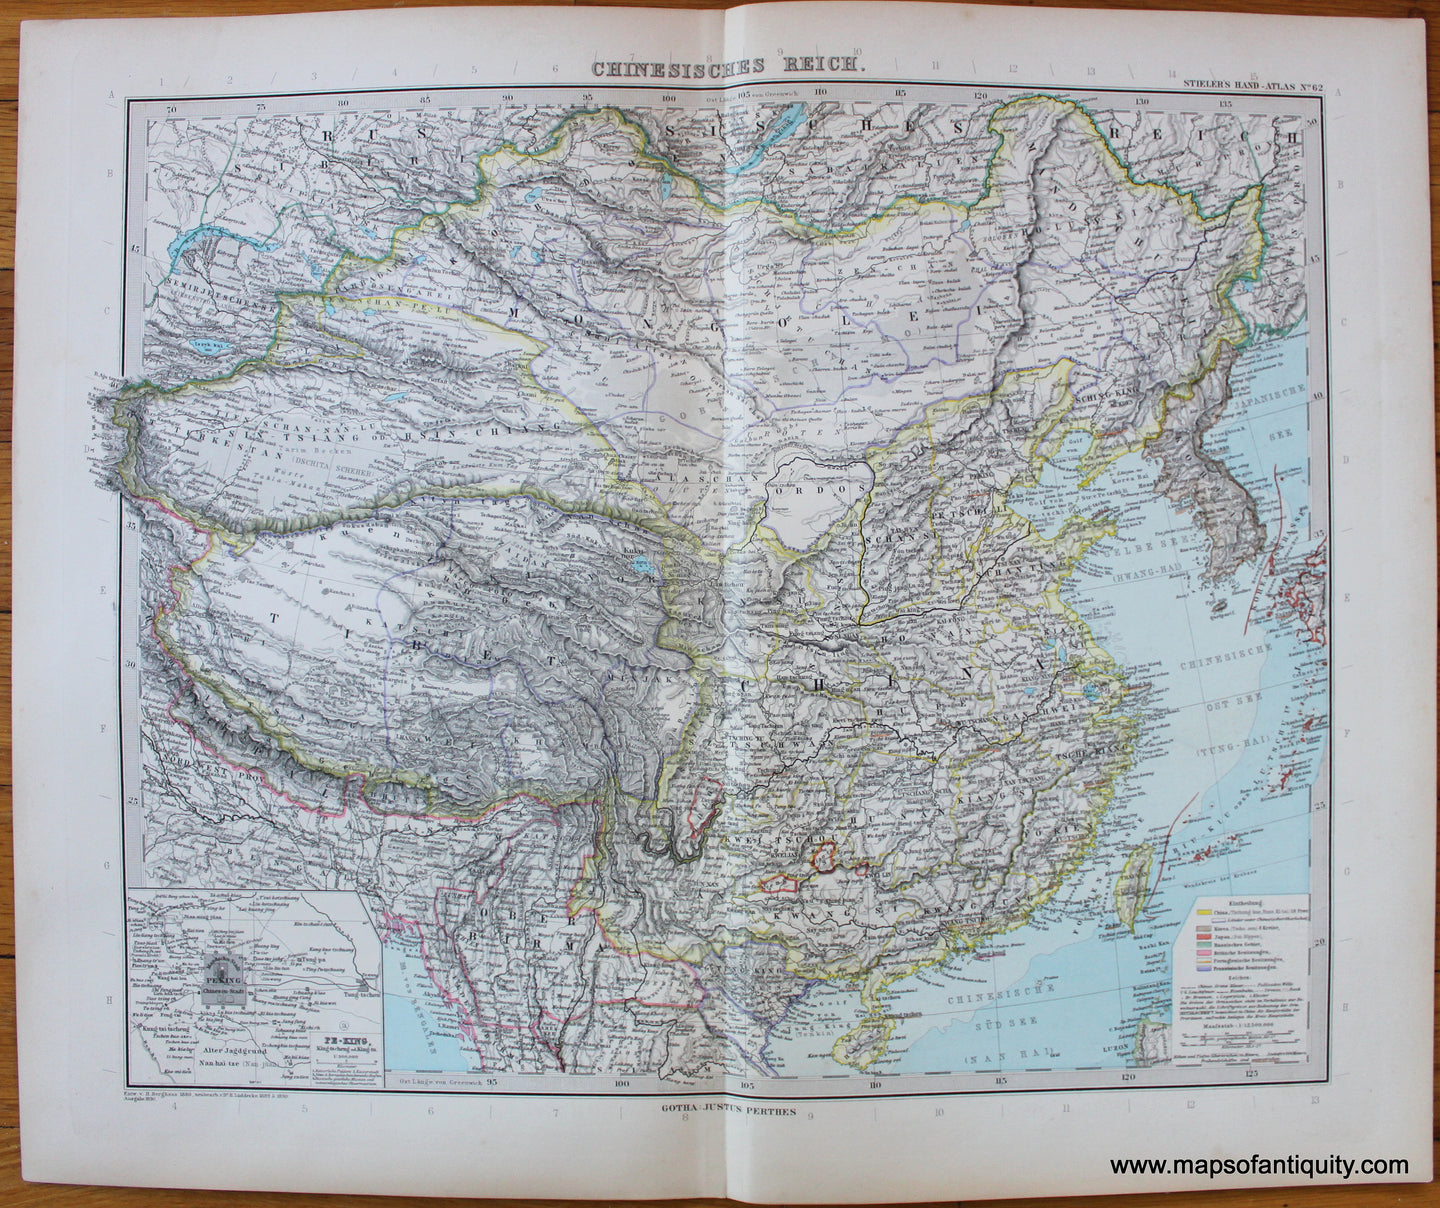 Antique-Printed-Color-Map-Chinesisches-Reich-Asia-China-c.-1889-Stieler-Maps-Of-Antiquity-1800s-19th-century